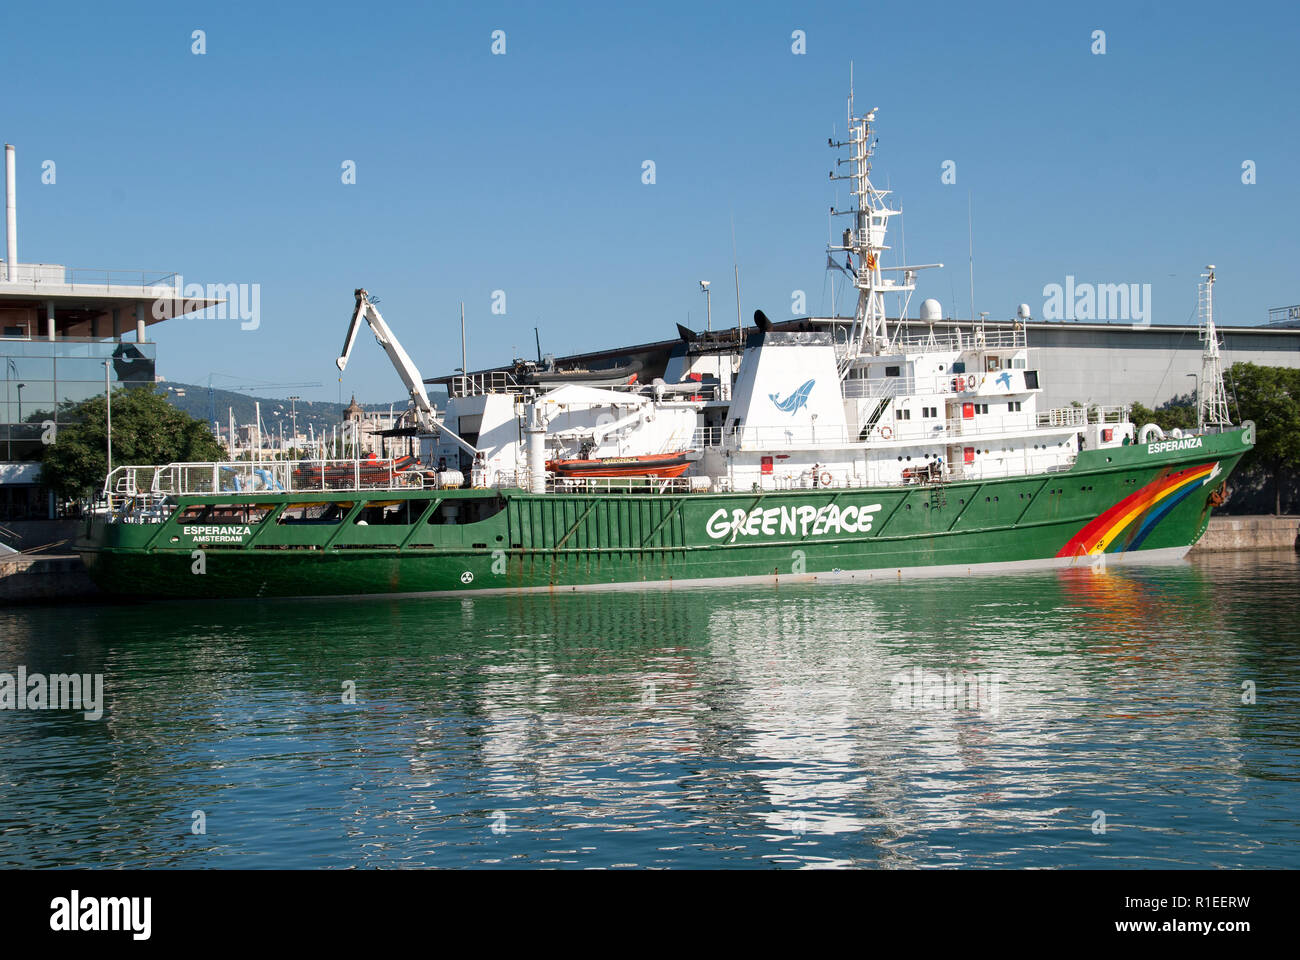 Esperanza ship of the Greenpeace organization, moored by its port side in the Maremagnum dock of the port of Barcelona, Spain. July 23, 2018. Stock Photo